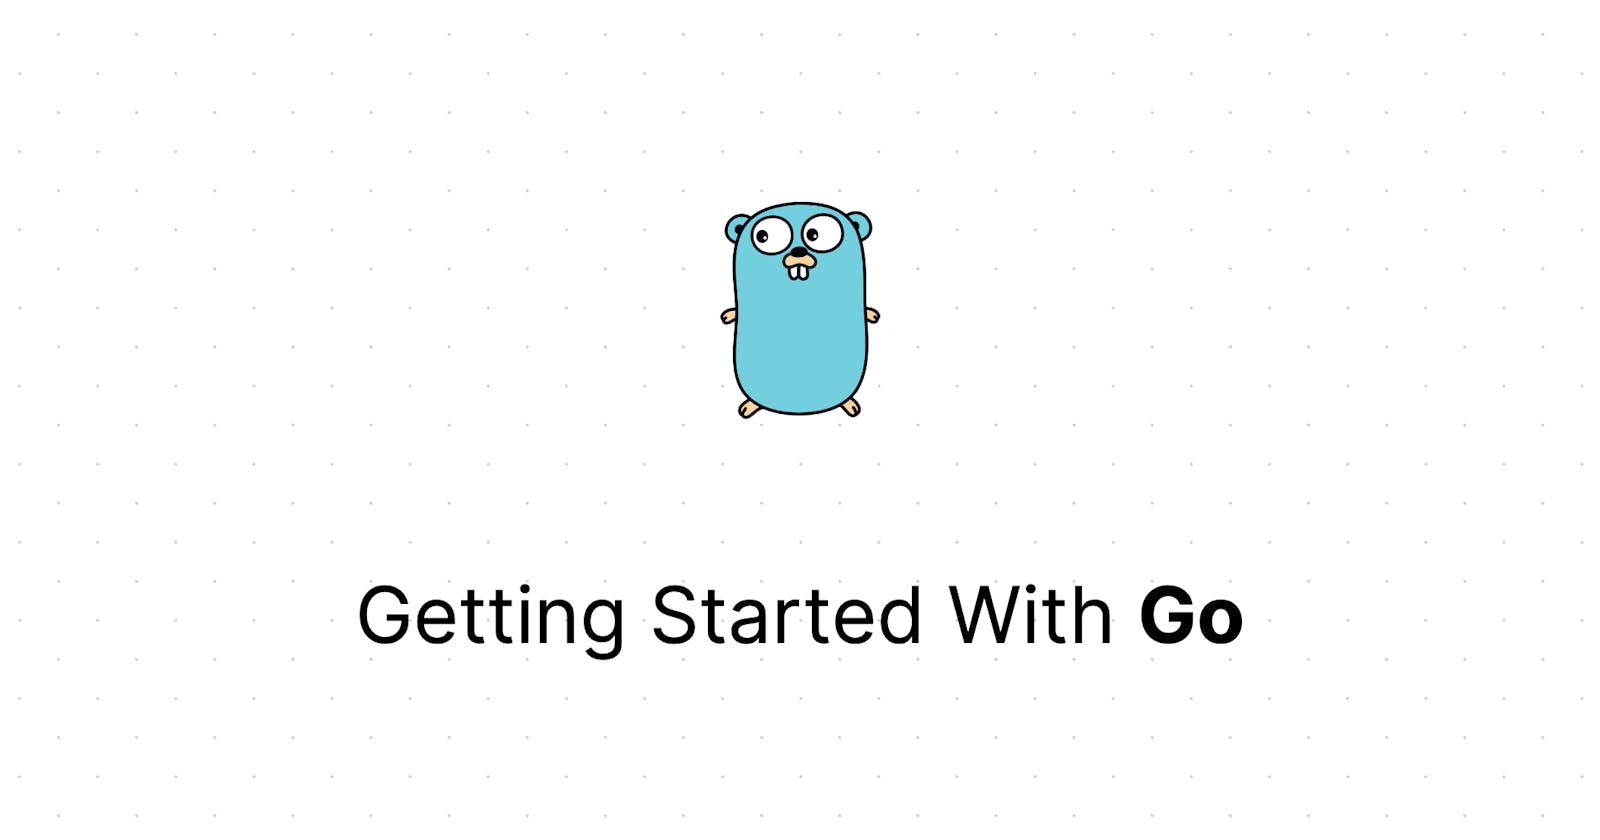 Getting Started With Go